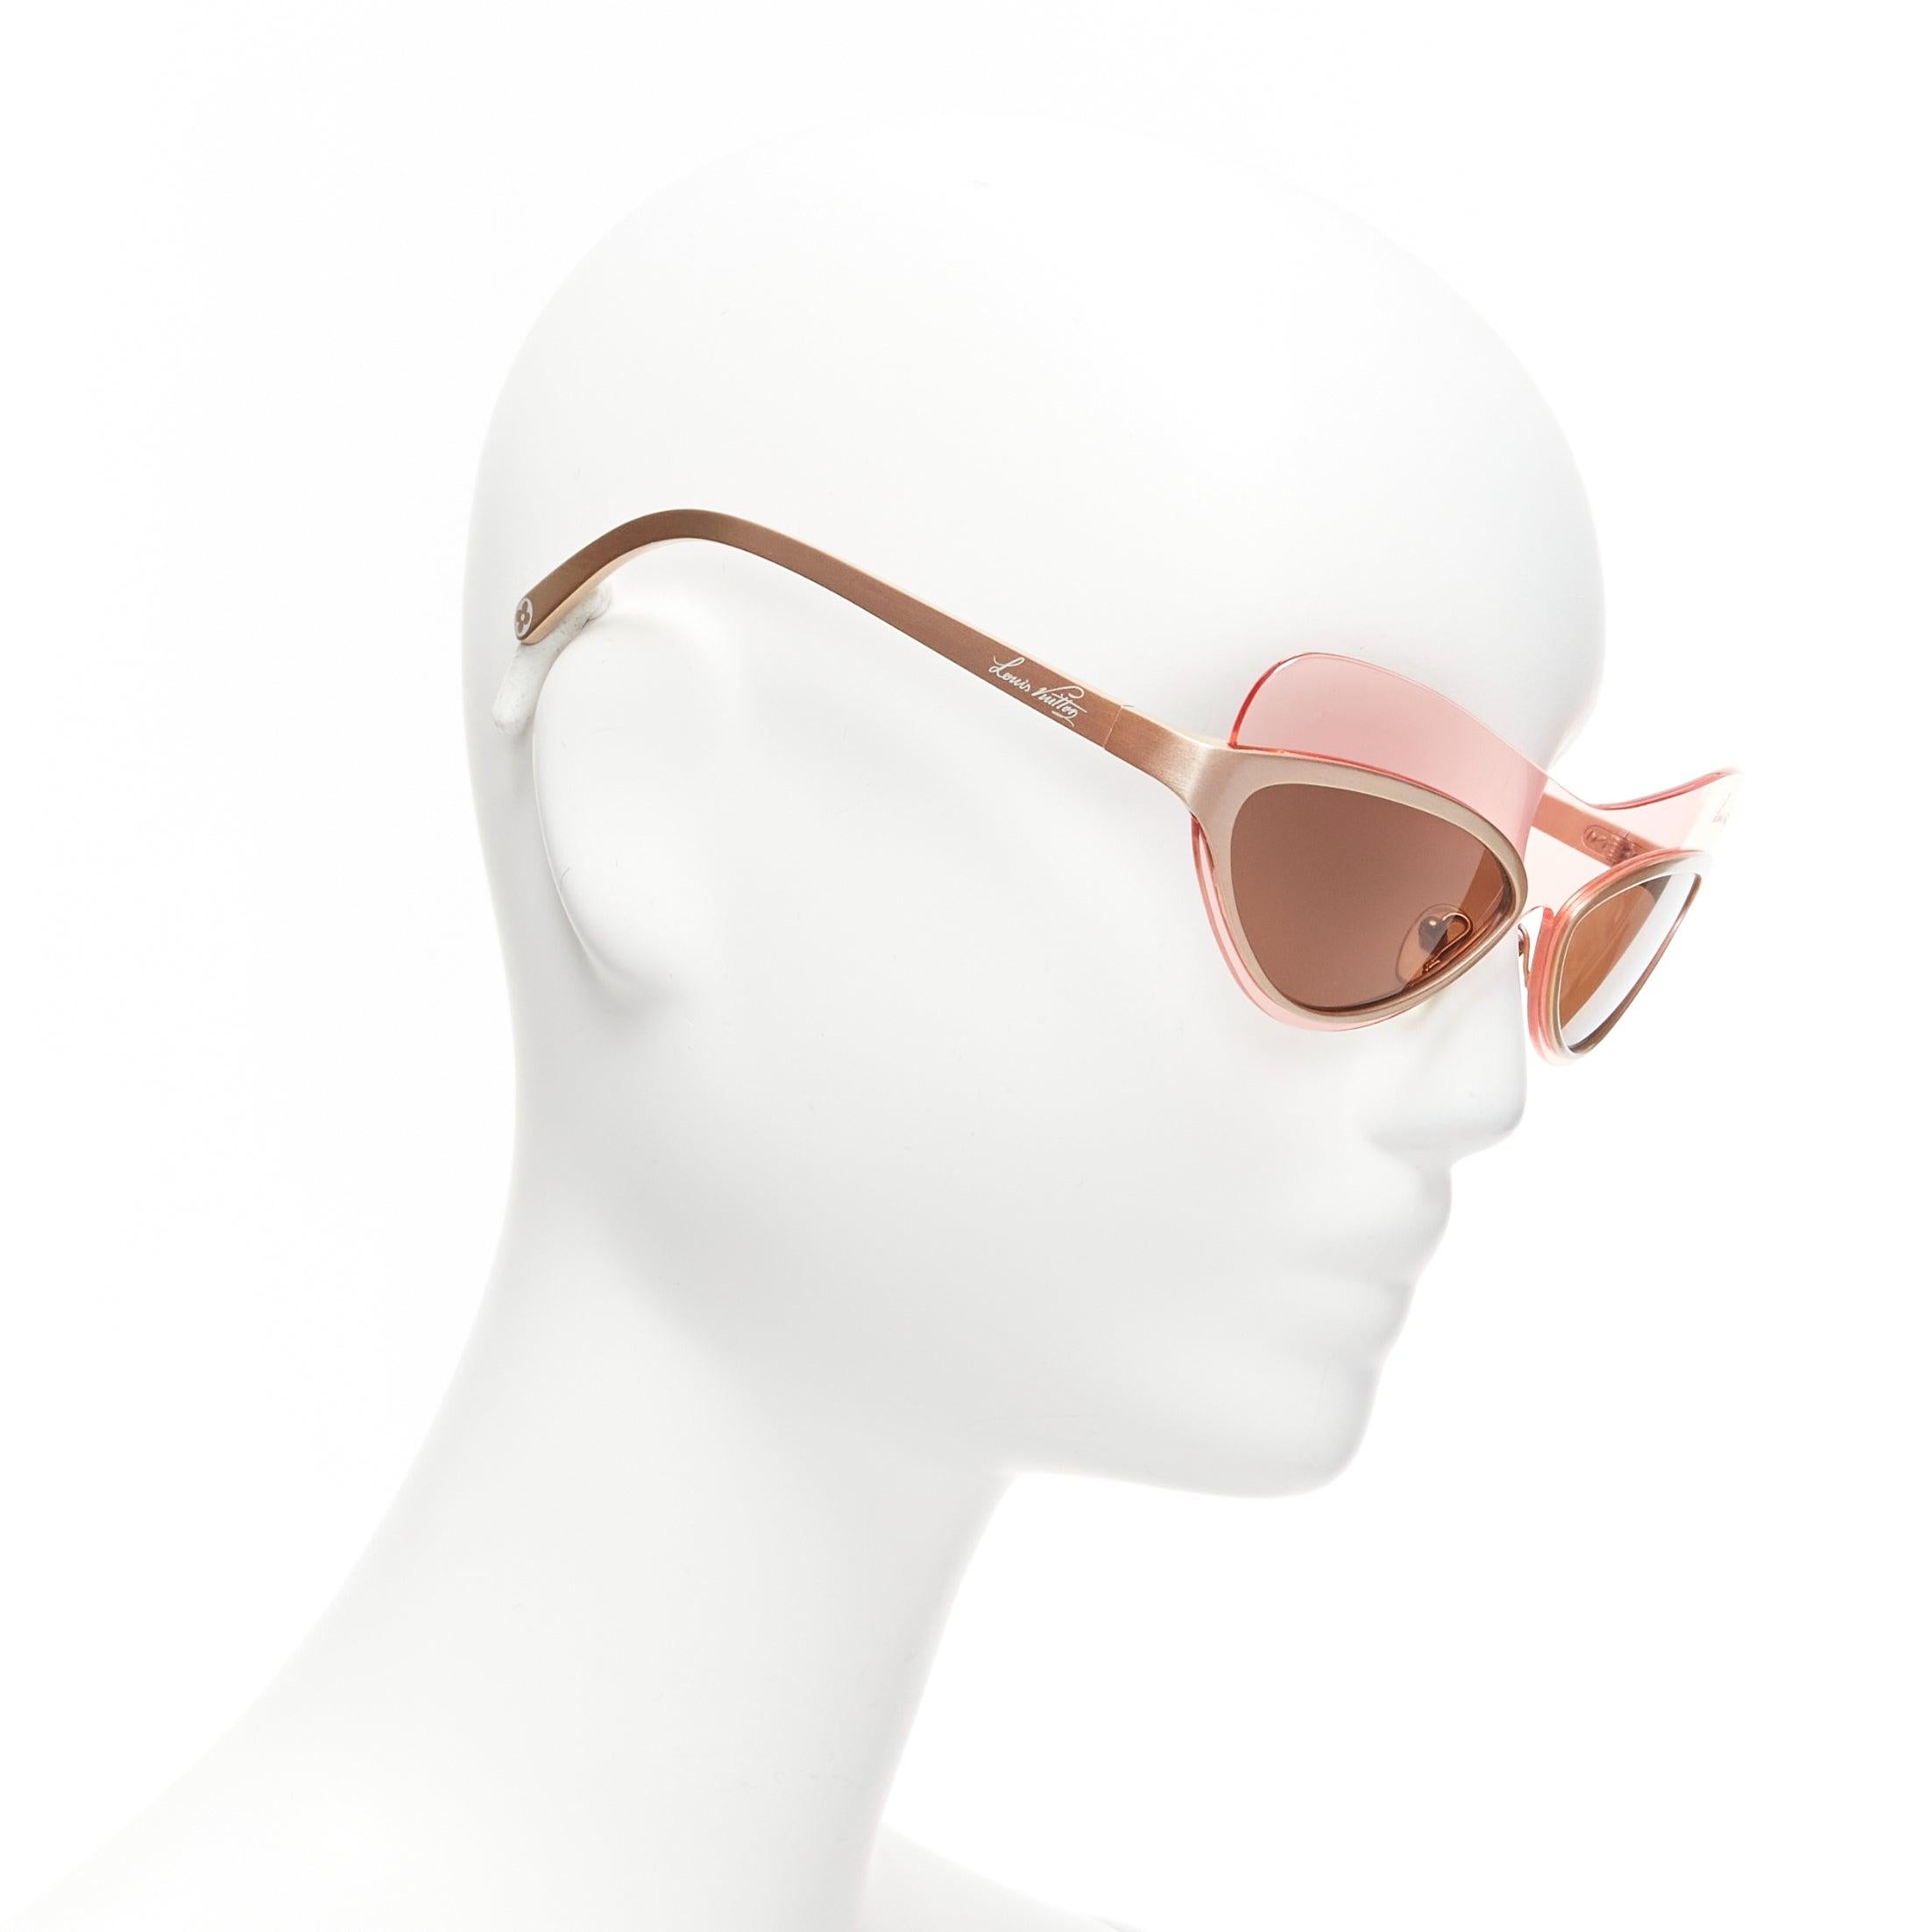 LOUIS VUITTON Ella Z0313U clear pink shield brown futuristic cateye sunglasses
Reference: NKLL/A00074
Brand: Louis Vuitton
Model: 2010
Collection: Ella
Material: Metal, Plastic
Color: Pink, Metallic
Pattern: Solid
Made in: